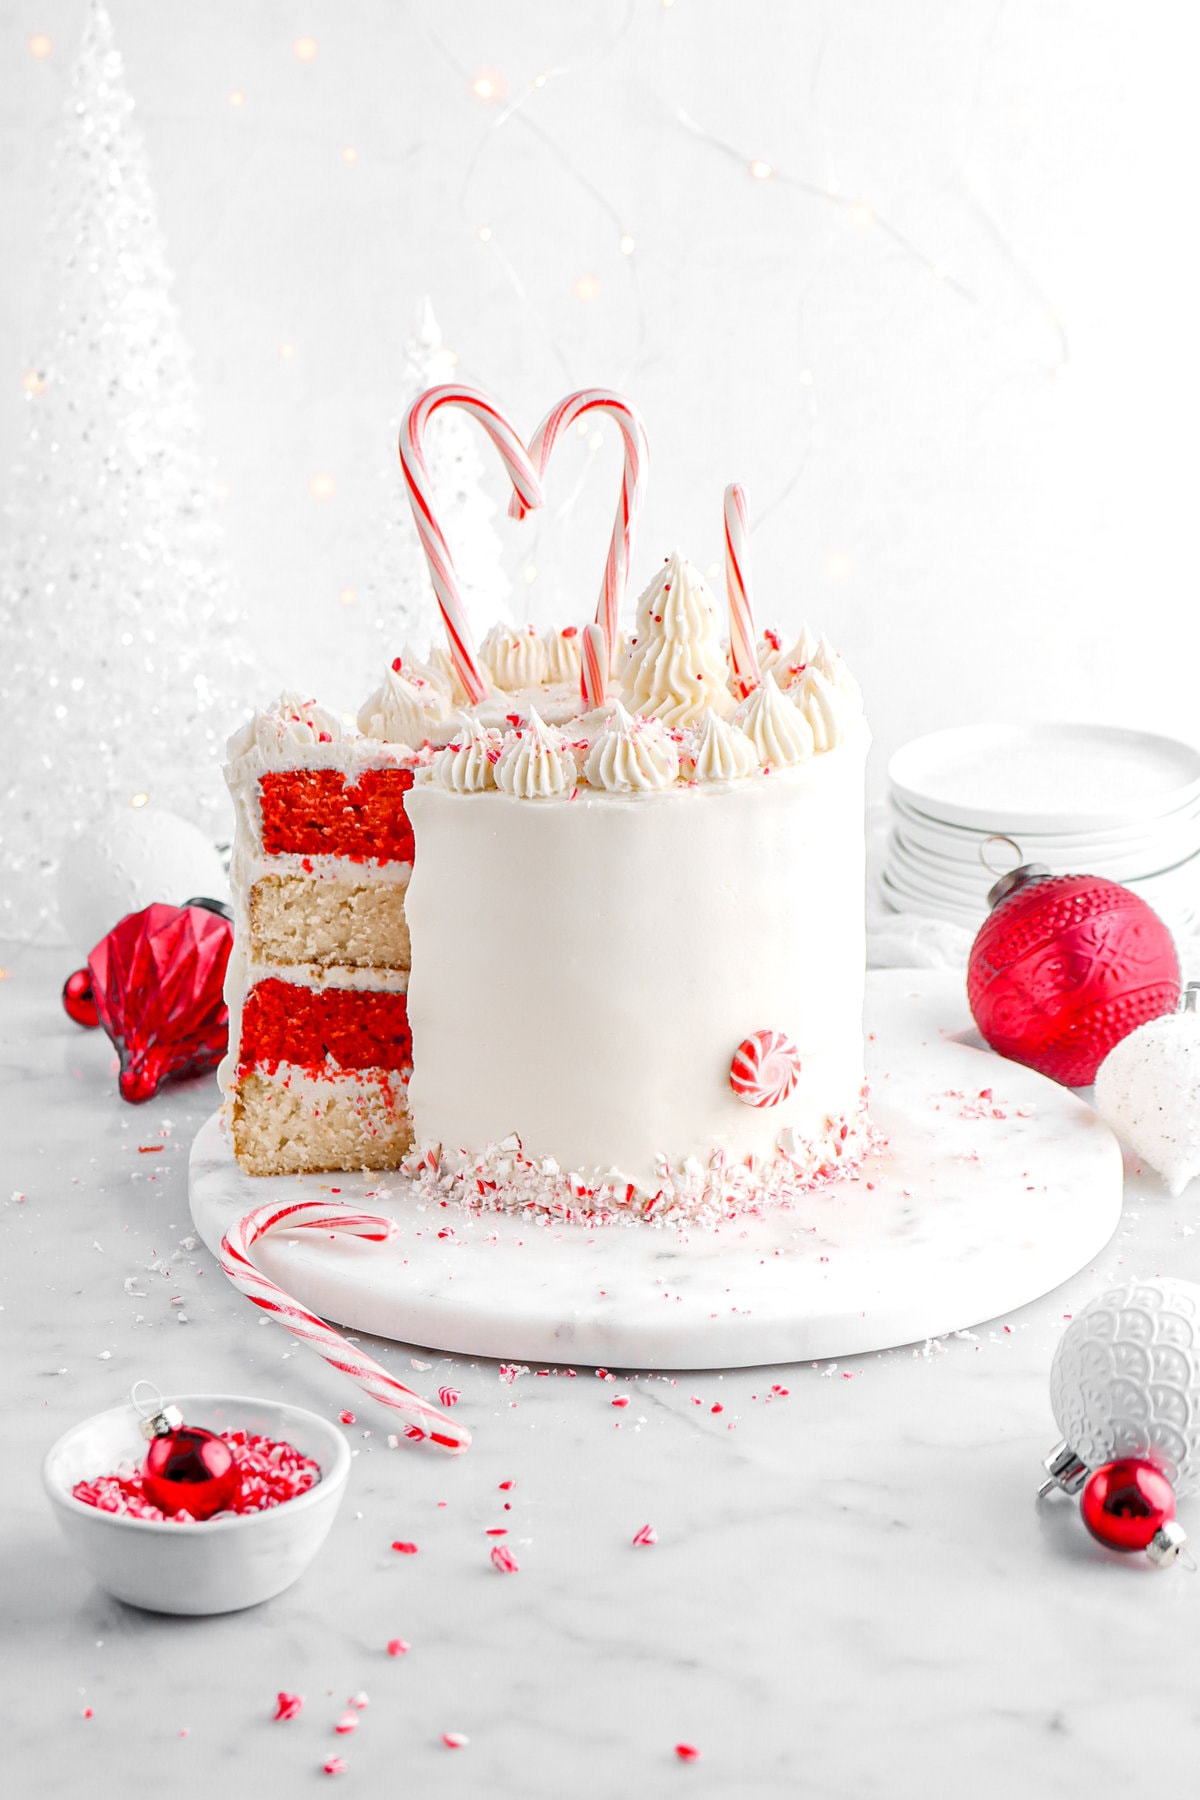 slice of white chocolate peppermint cake with red and white layers slightly pulled away from cake on marble surface with candy cane pieces and red and white ornaments around.